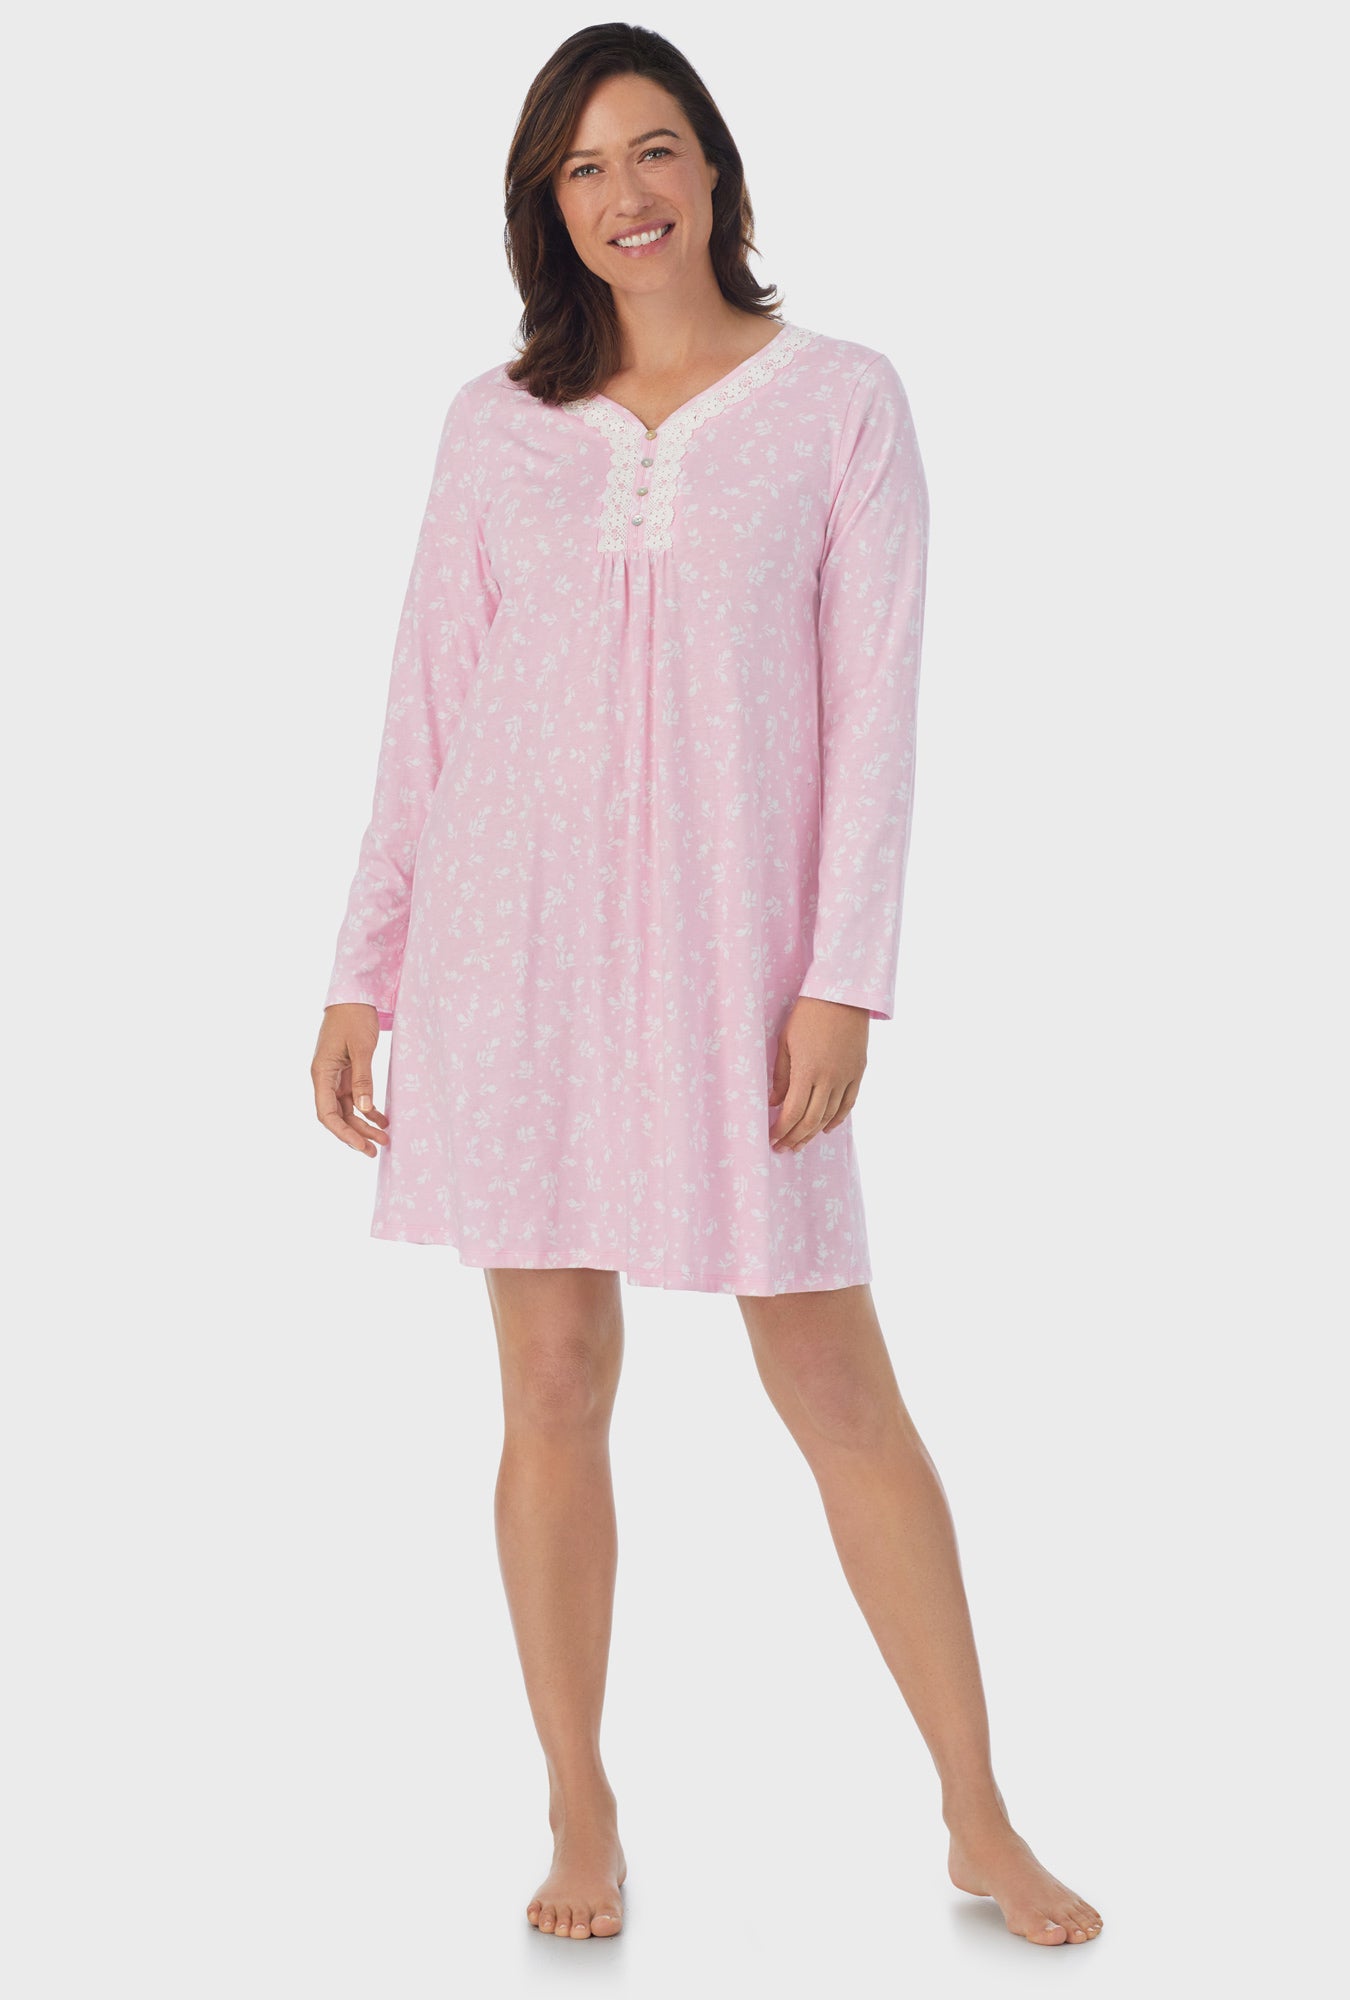 A lady wearing pink Long Sleeve Nightgown with White Rosebuds  print